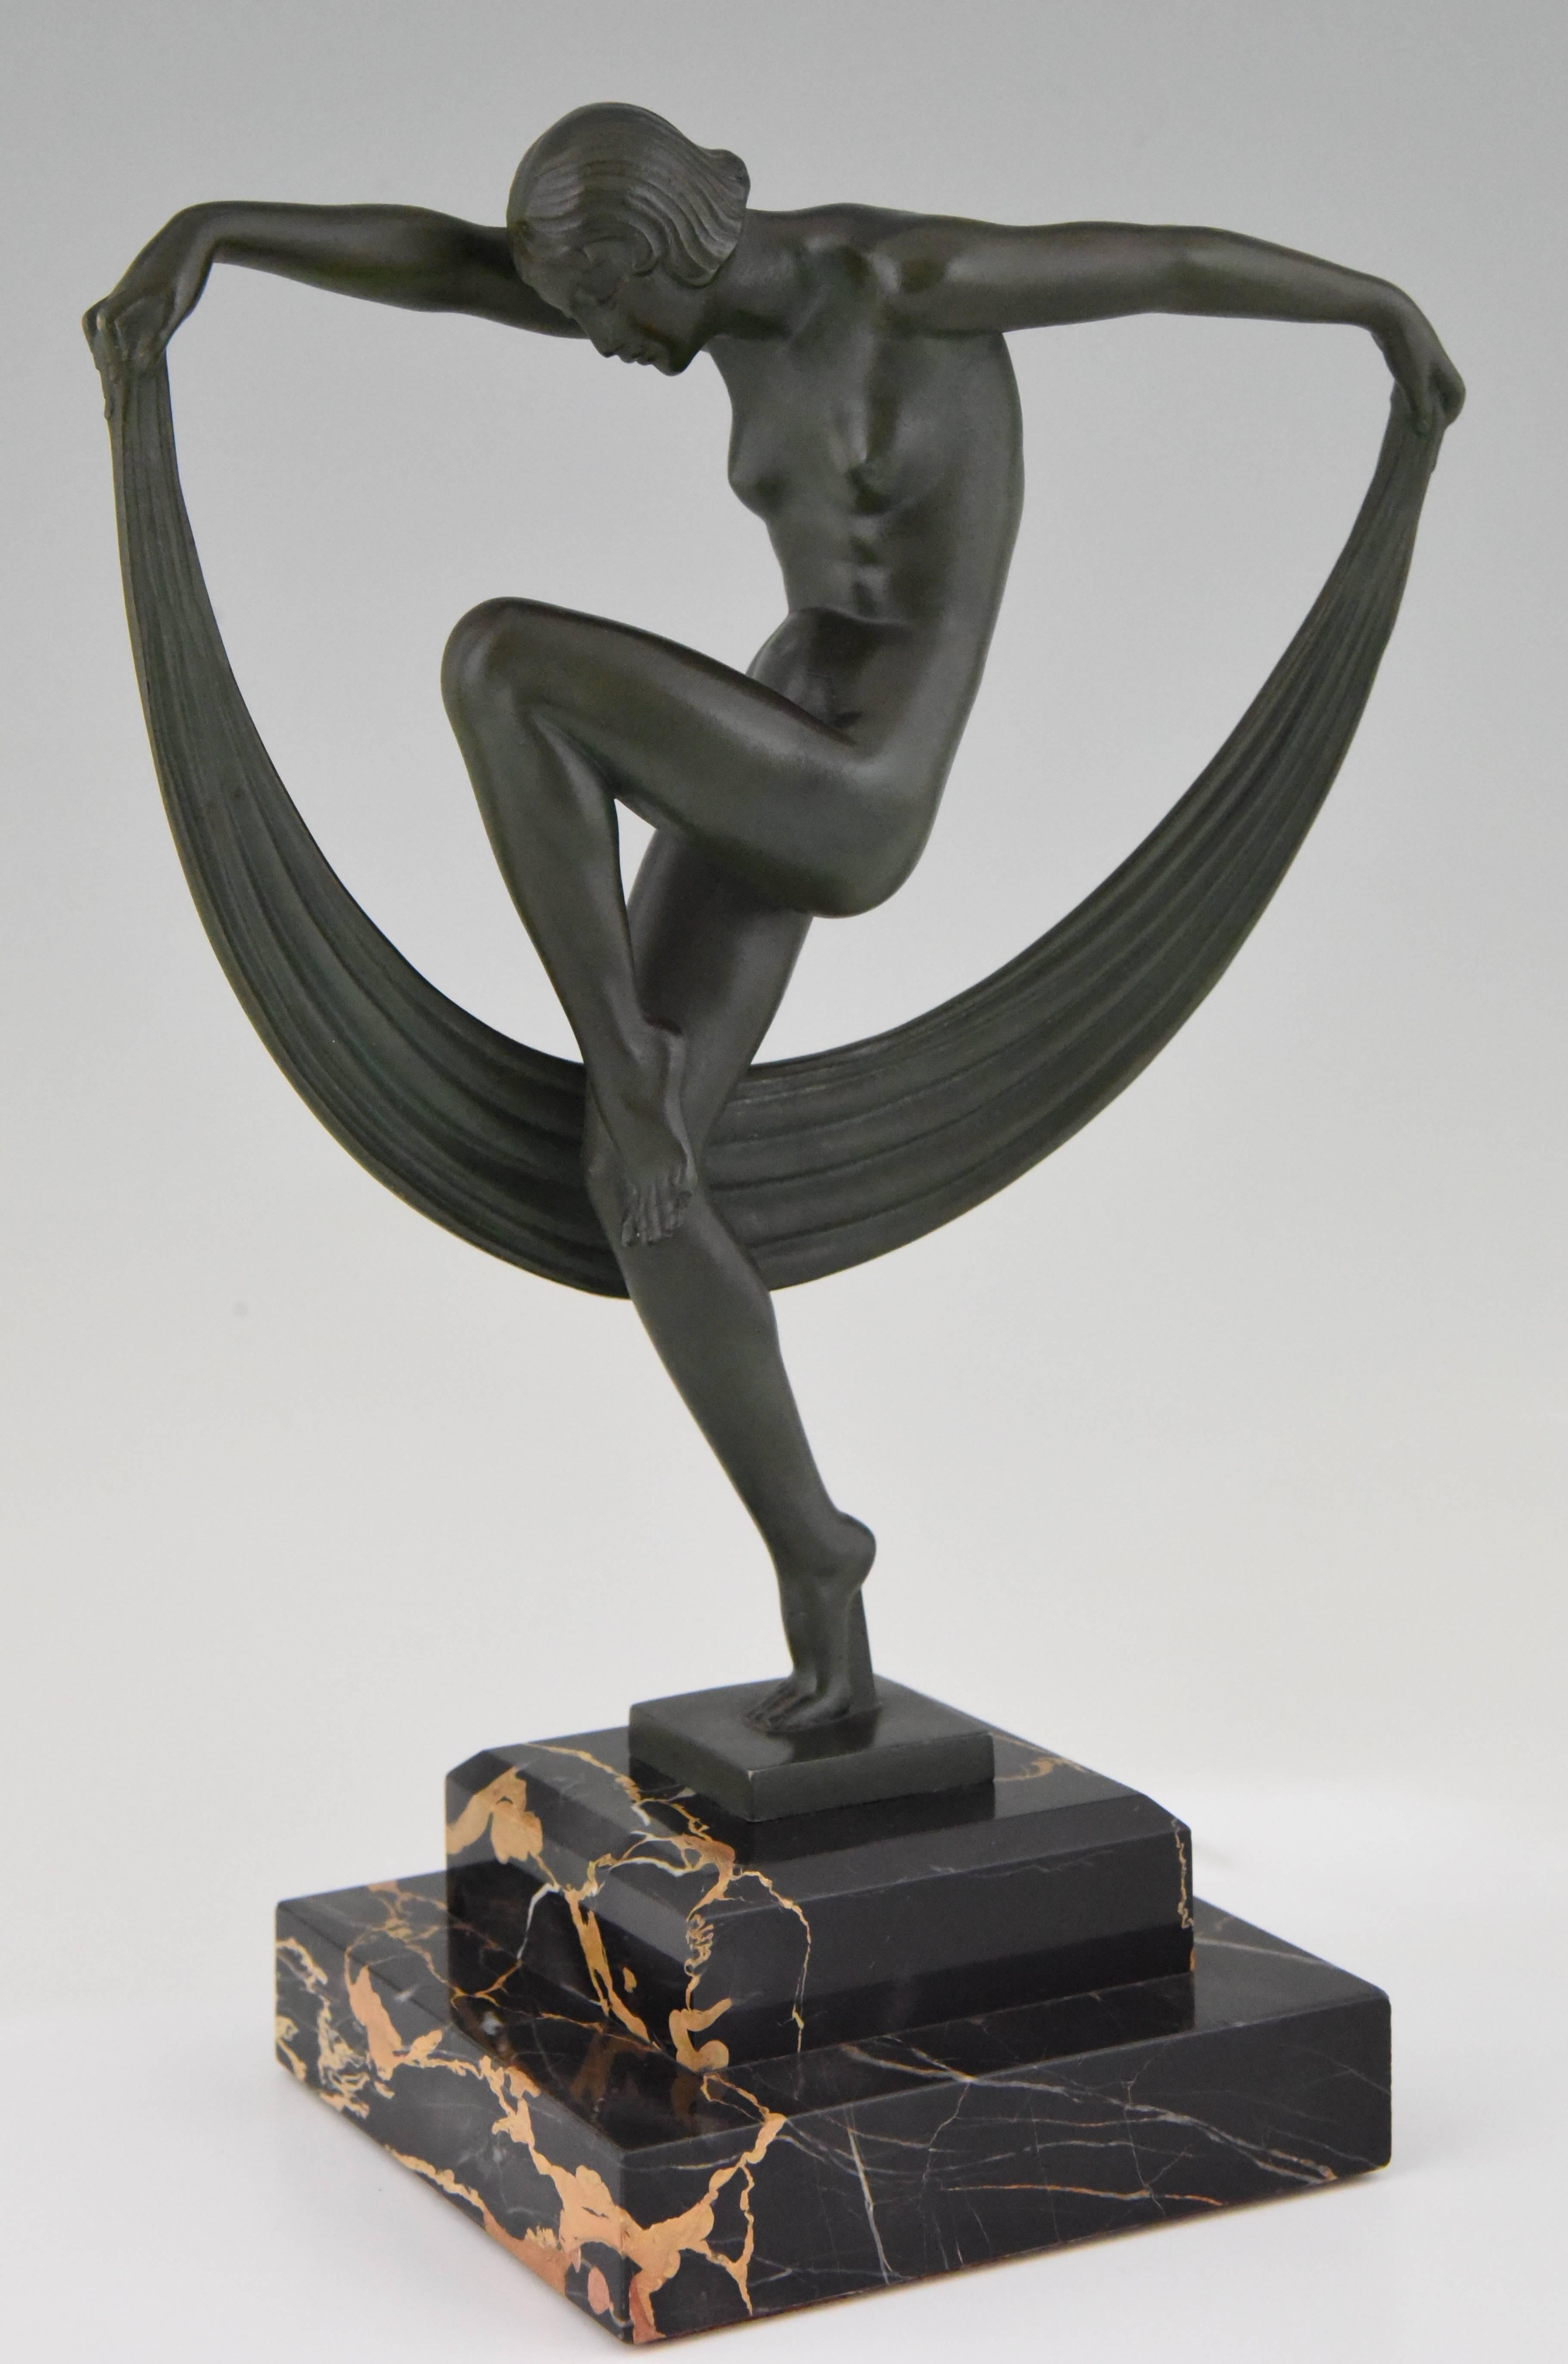 Elegant Art Deco sculpture of a dancing nude with scarf by the French artist Denis. On a stepped Portor marble base.
Signature/ Marks: Denis
Style: Art Deco
Date: 1930
Material: Patinated art metal. Portor marble base
Origin: France.
Size: H.